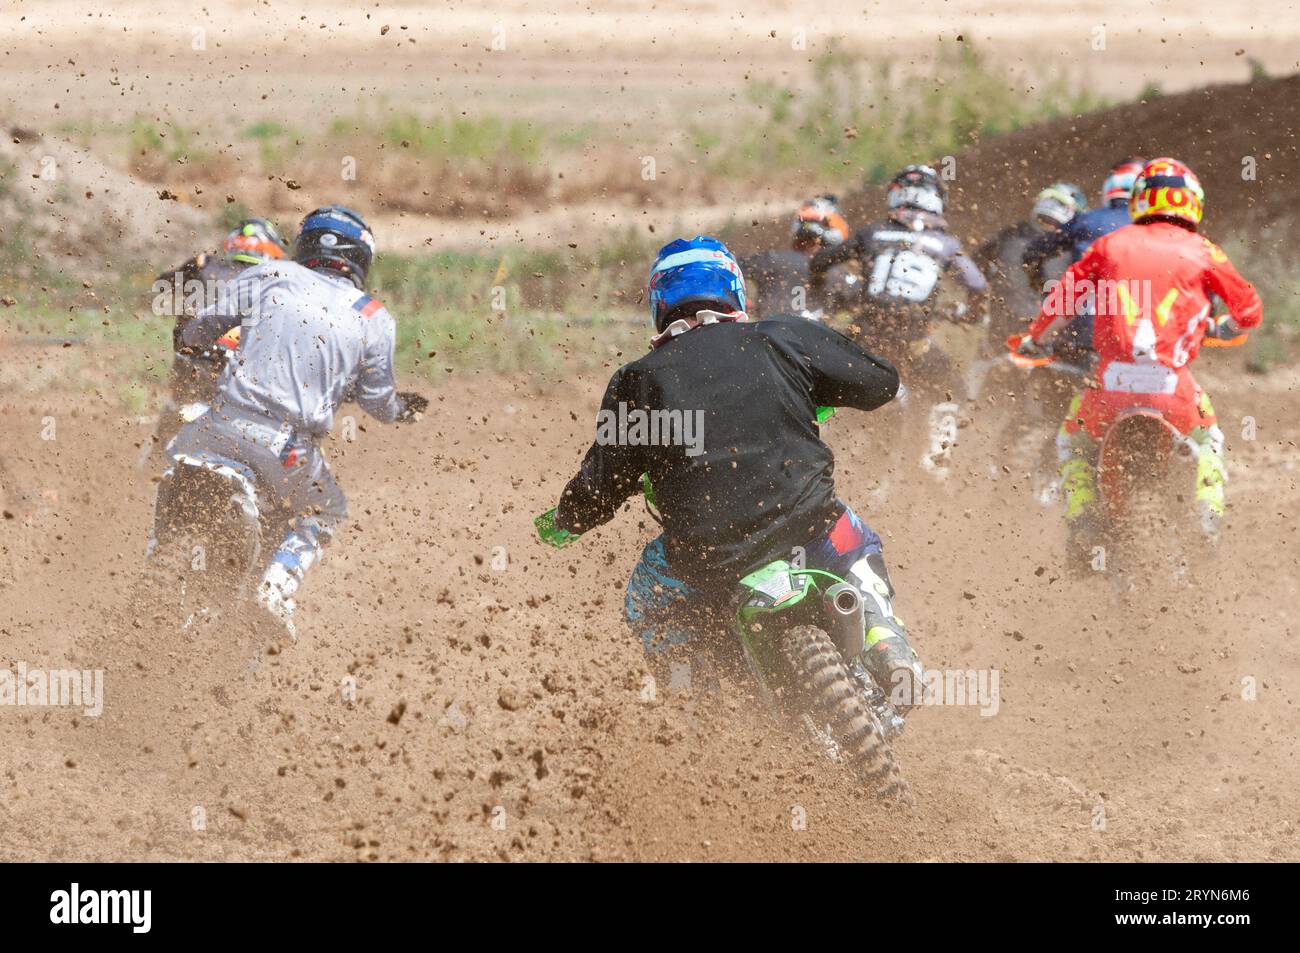 Unrecognized athletes riding a sports motorbike racing fast on a motocross track field. Challenge and competition Stock Photo